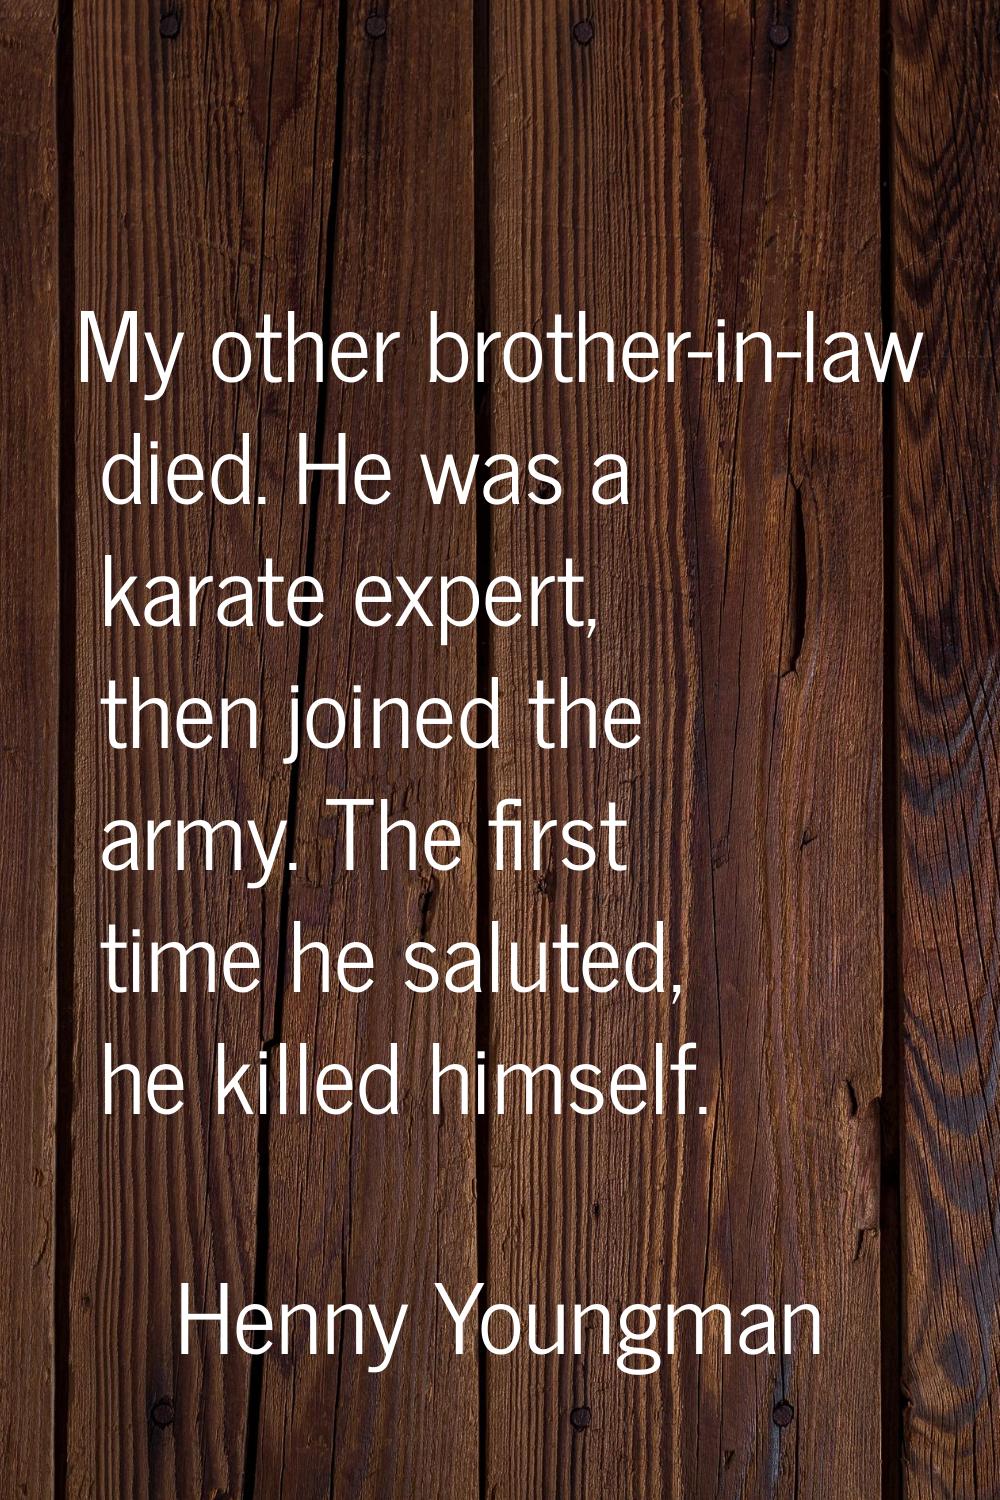 My other brother-in-law died. He was a karate expert, then joined the army. The first time he salut